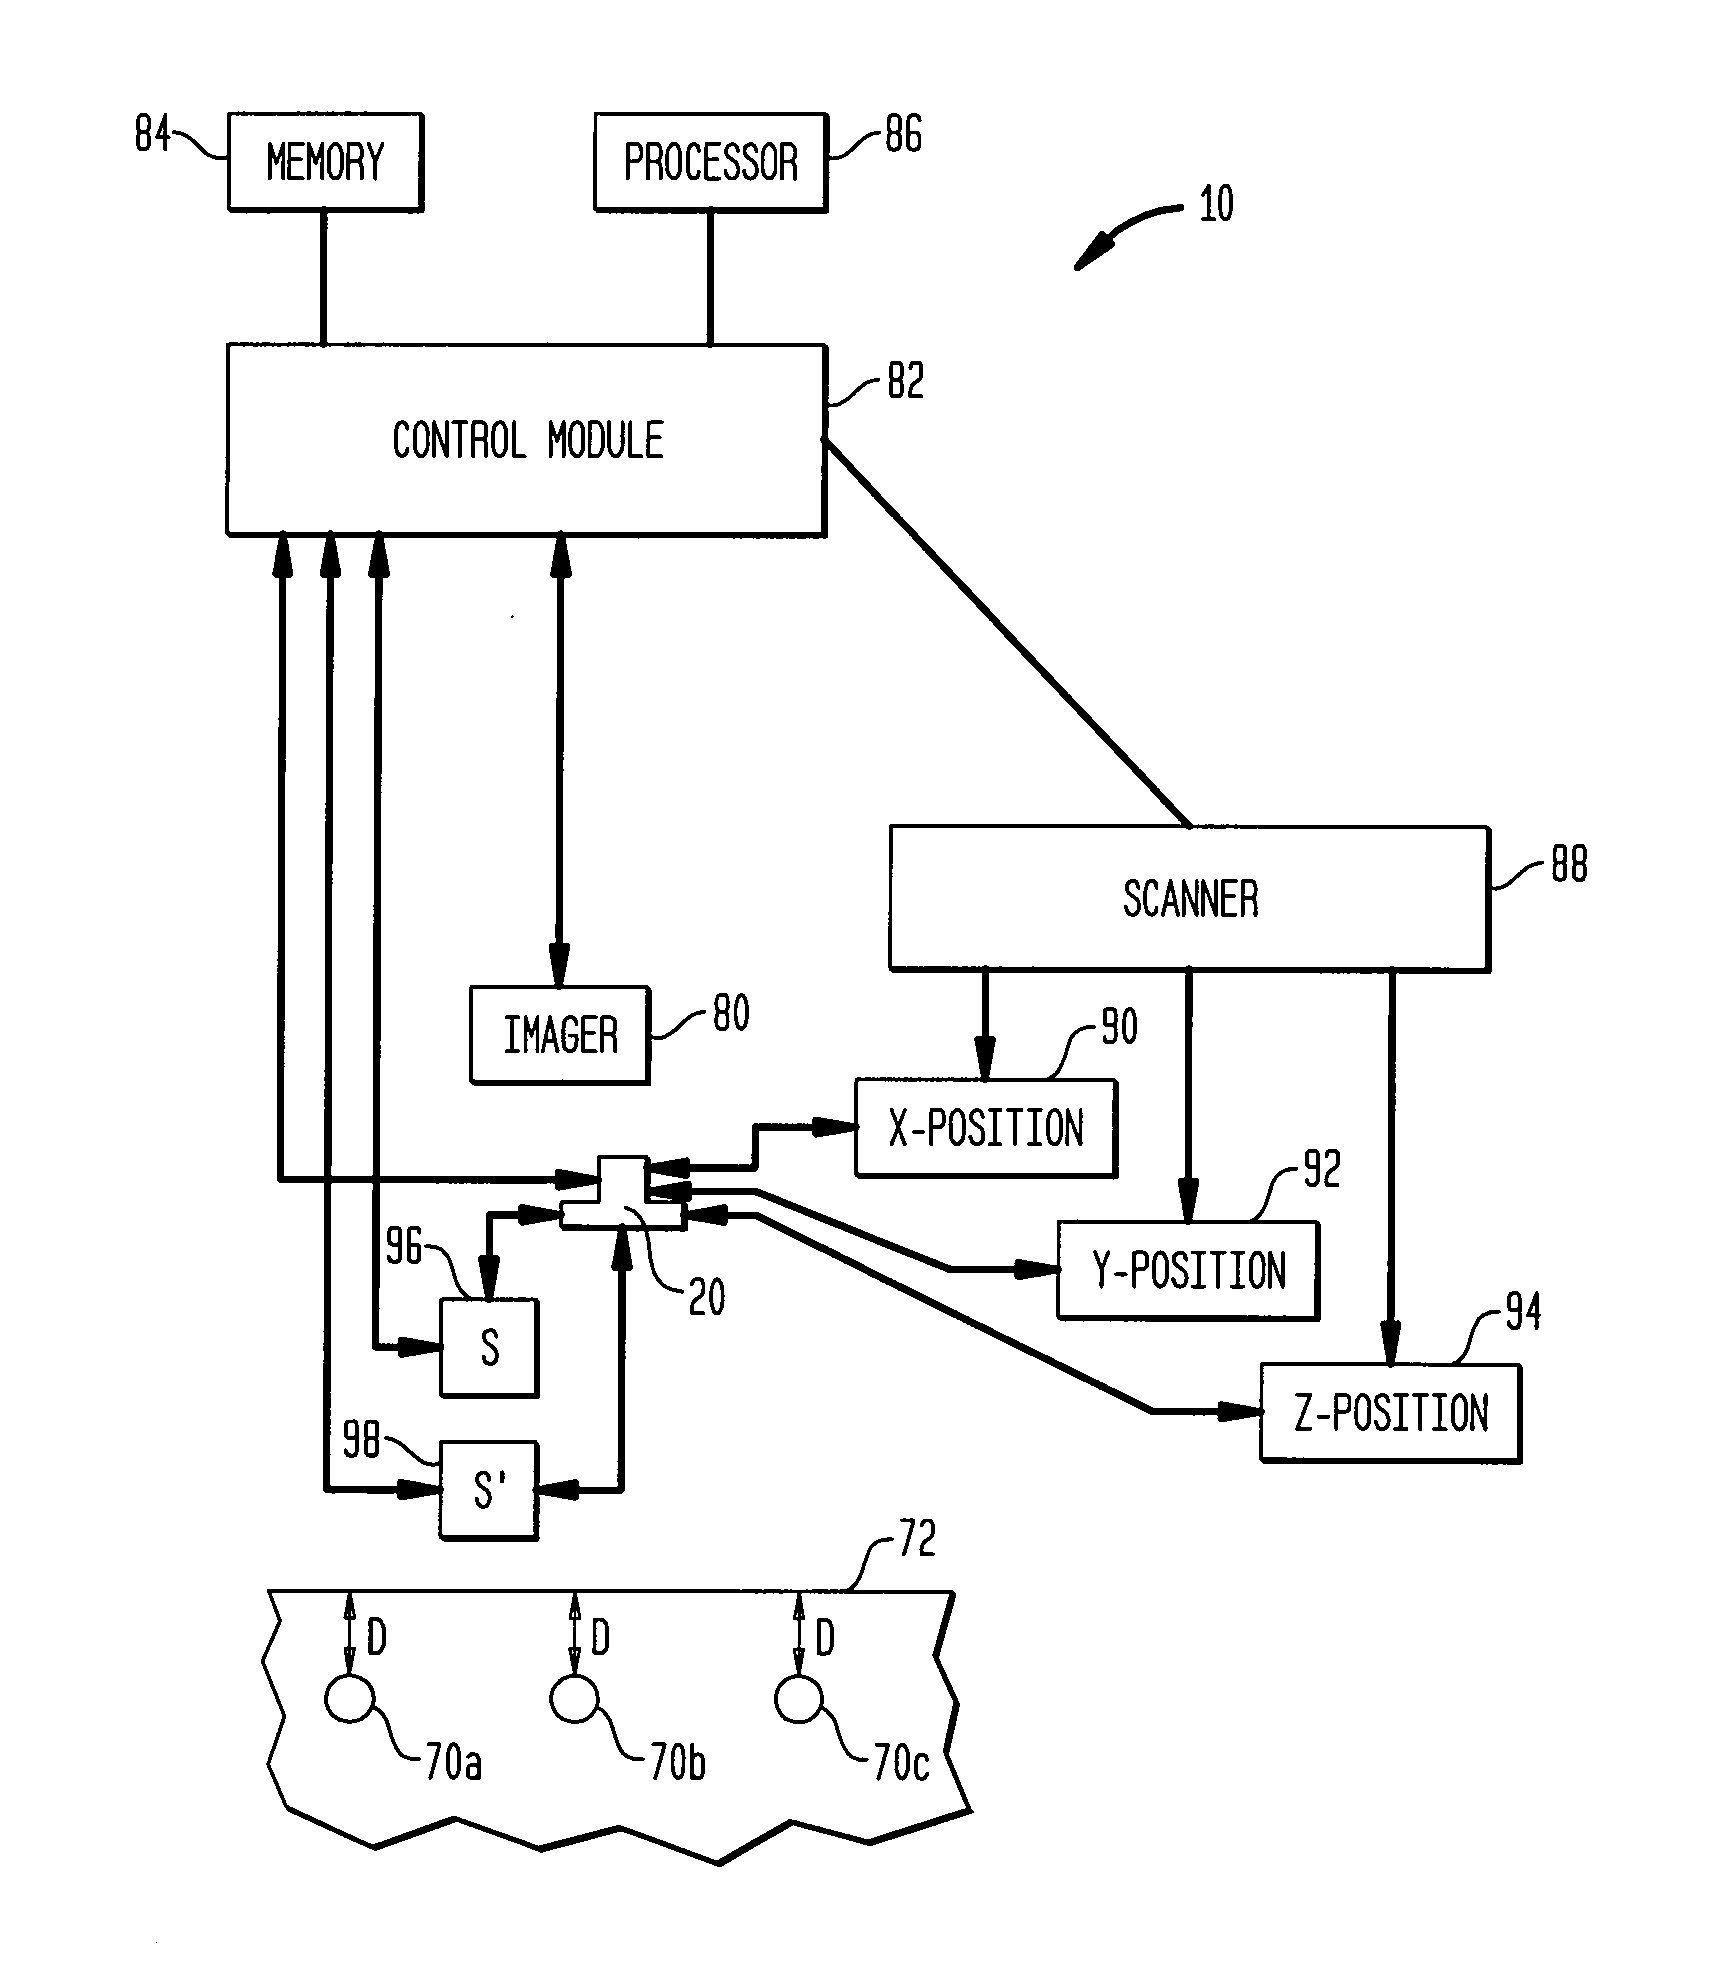 System and method of treating tissue with ultrasound energy